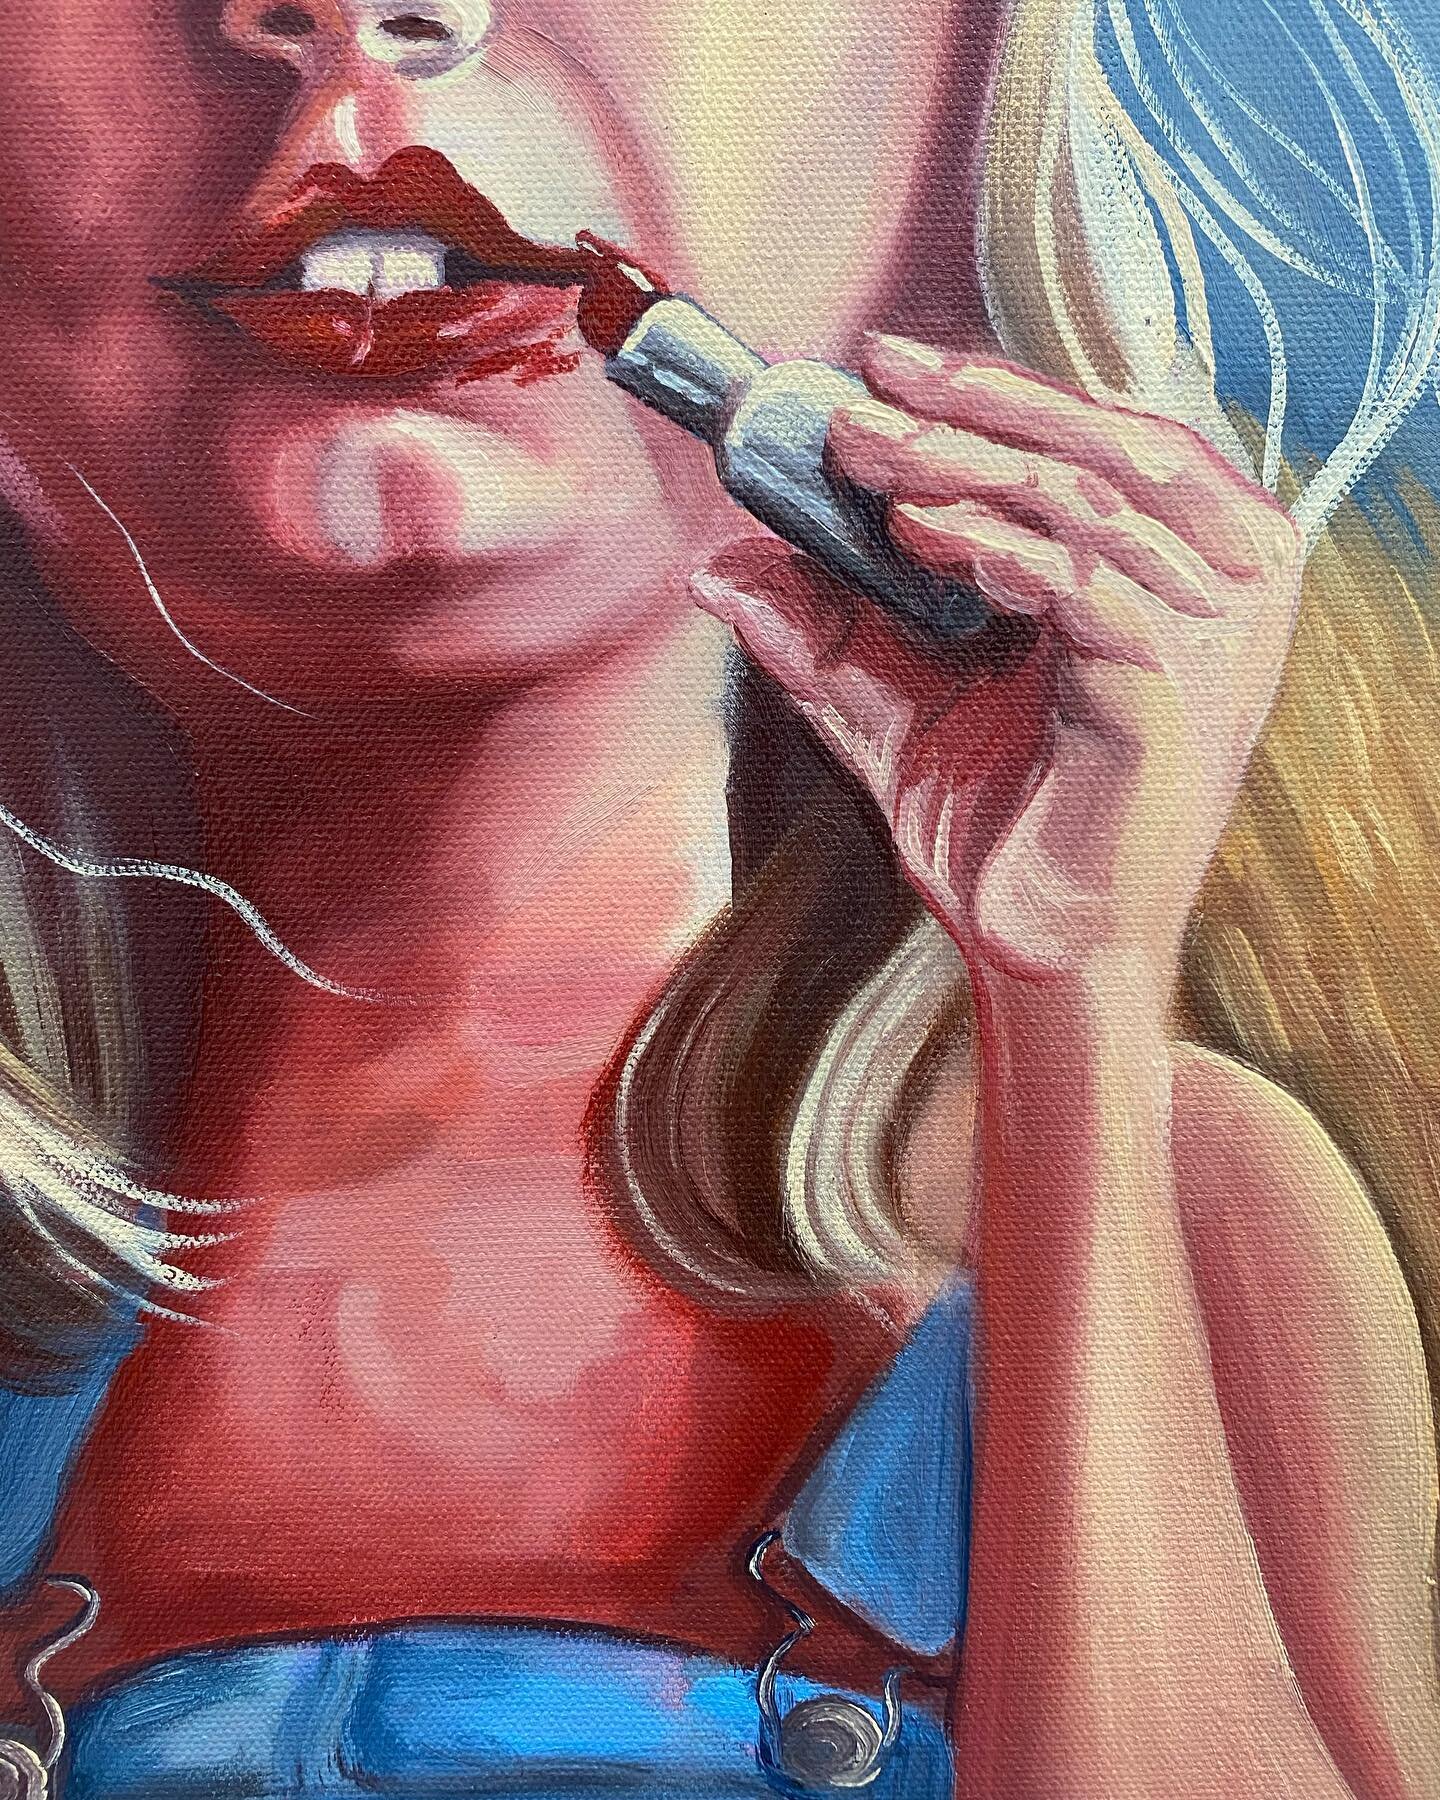 close up from my most recent piece 

feeling very Midwest these days

#oilpainting #contemporaryart #contemporarypainting #mfa #painting #figurativeart #contemporaryfigurativeart